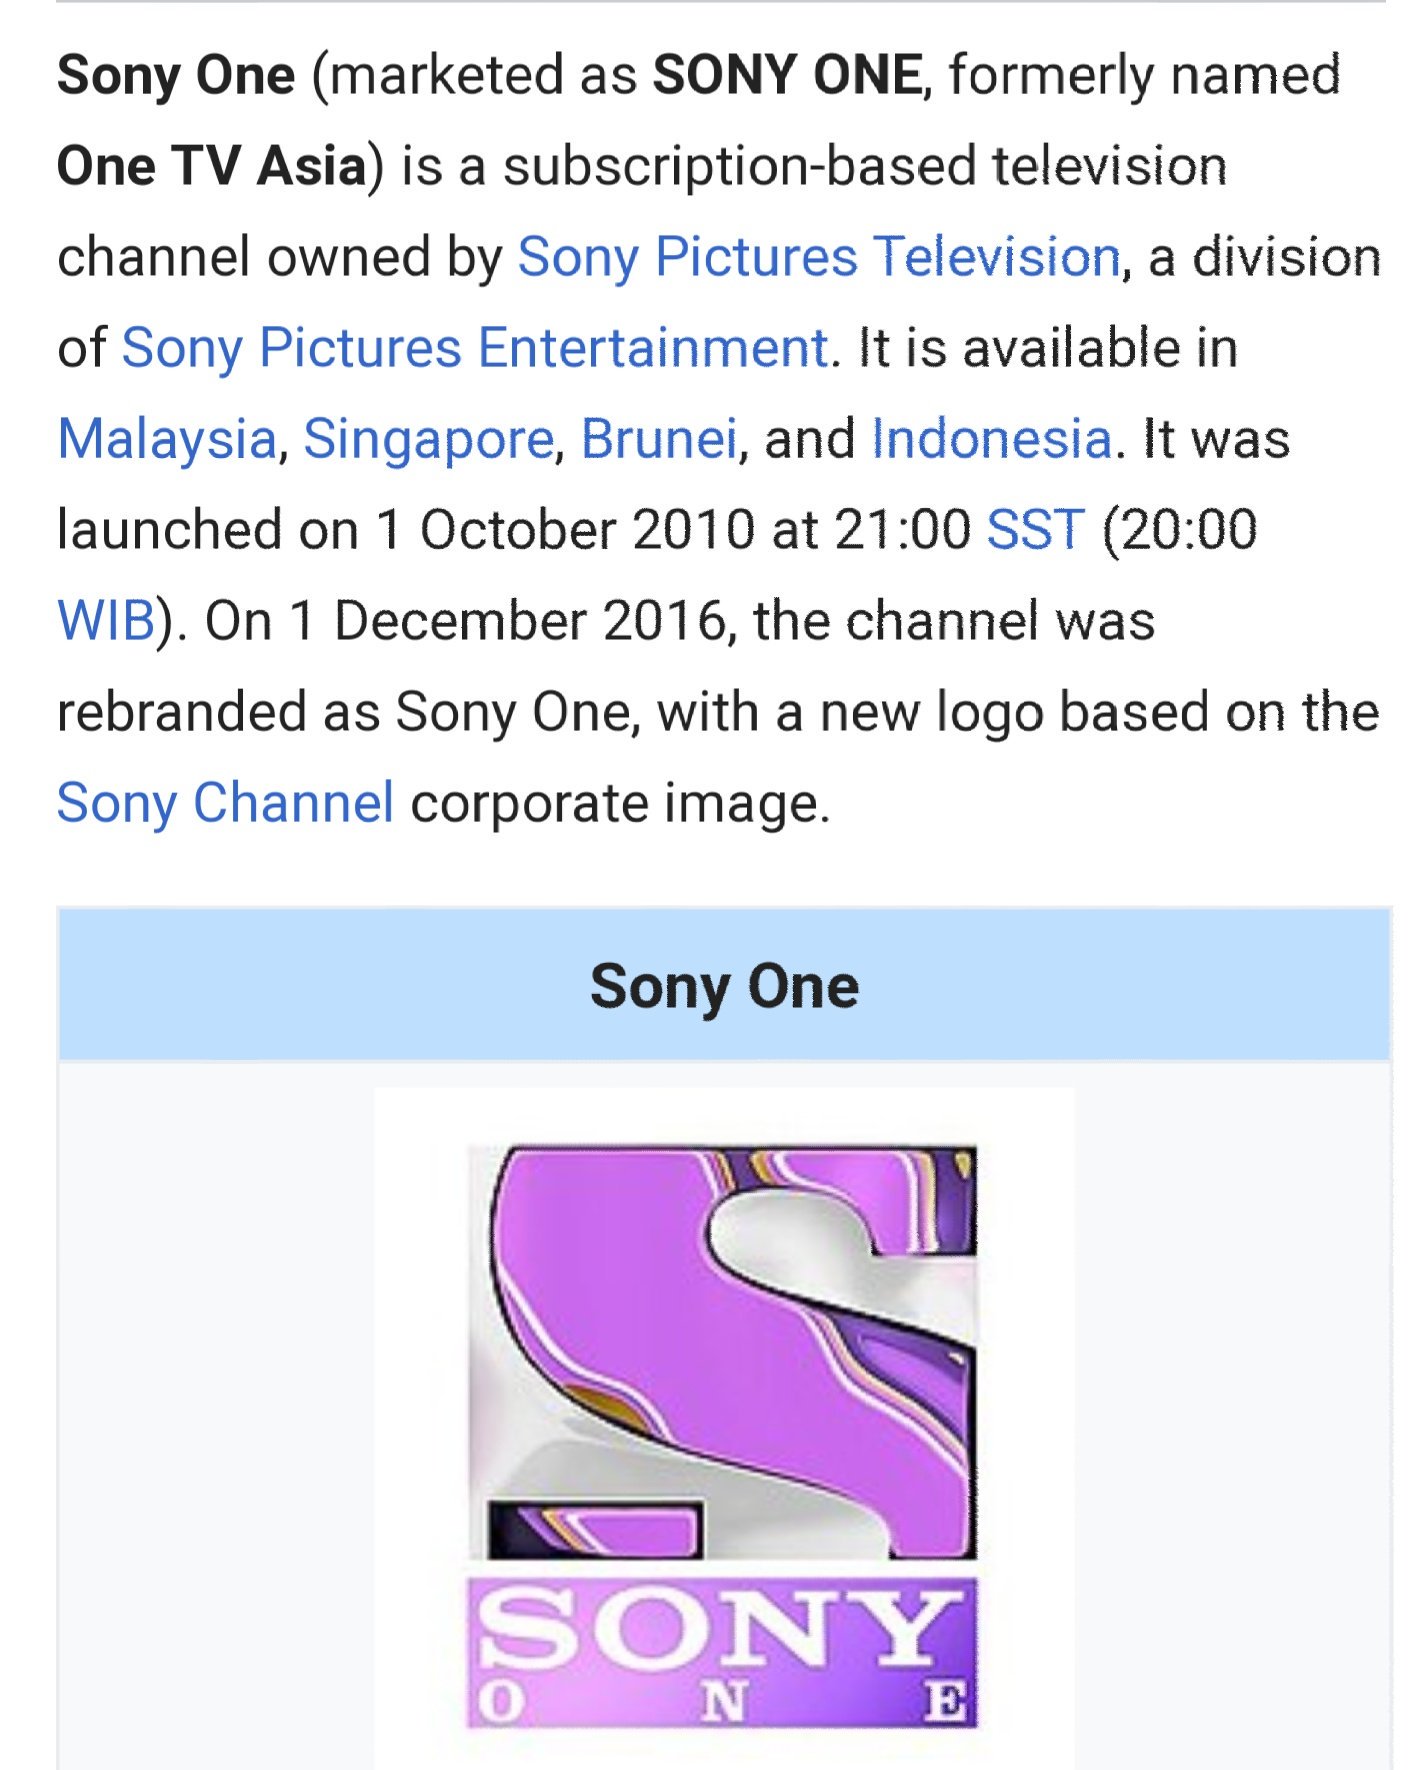 ONE TV Asia